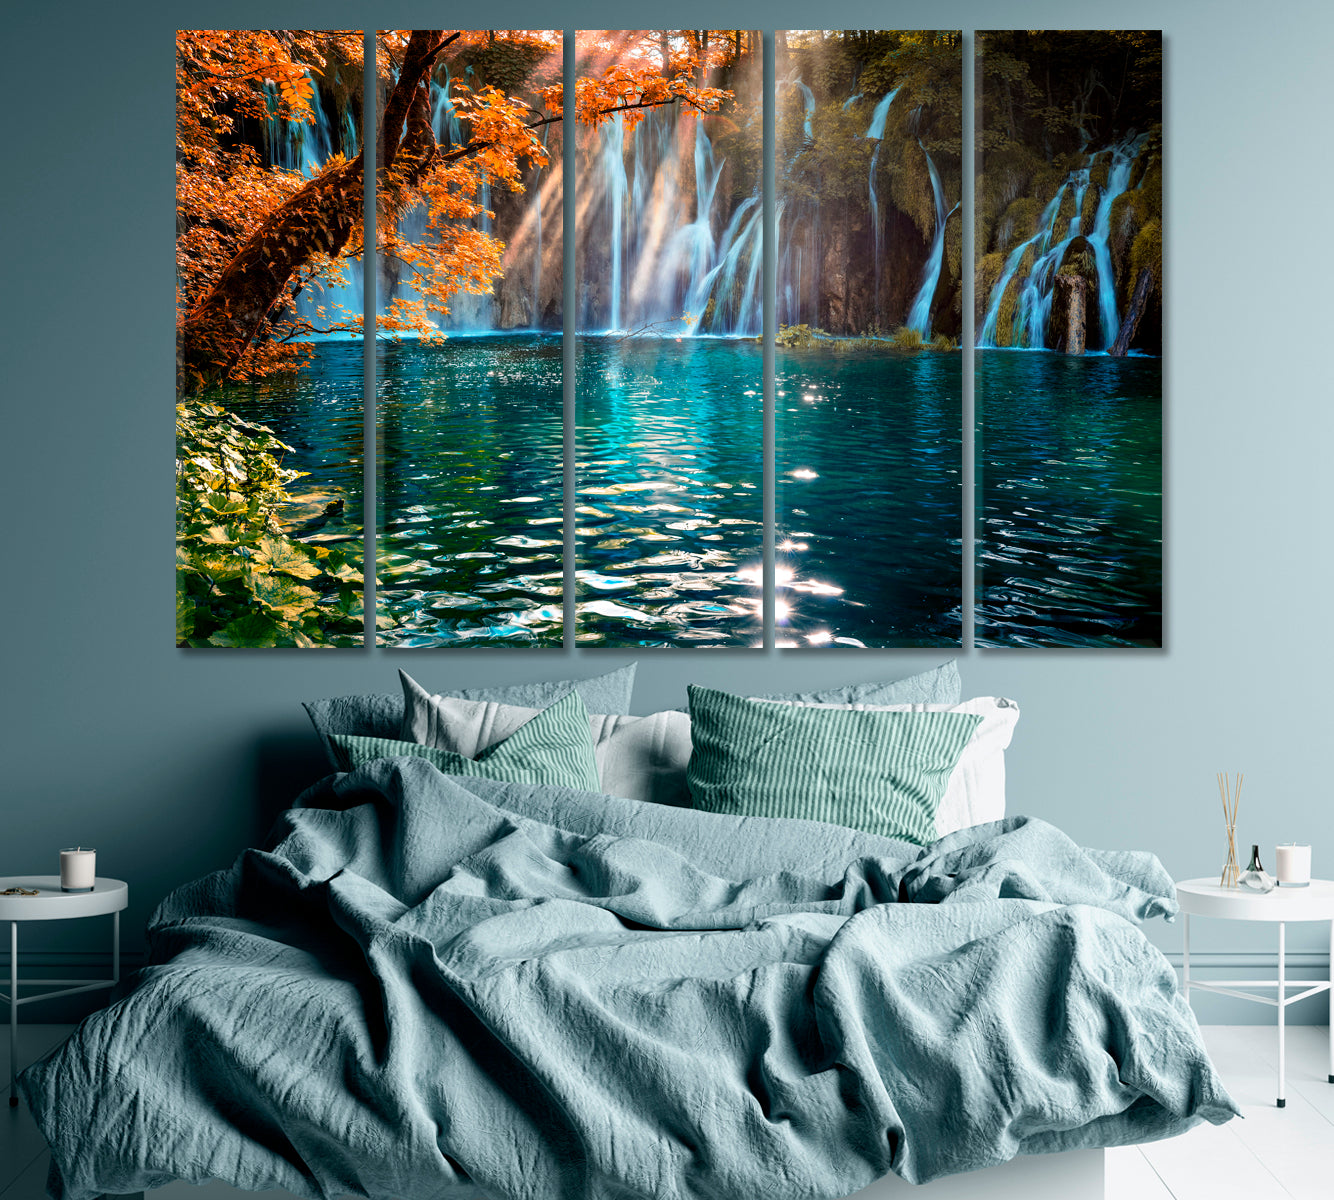 Waterfall in Plitvice National Park Canvas Print ArtLexy 5 Panels 36"x24" inches 